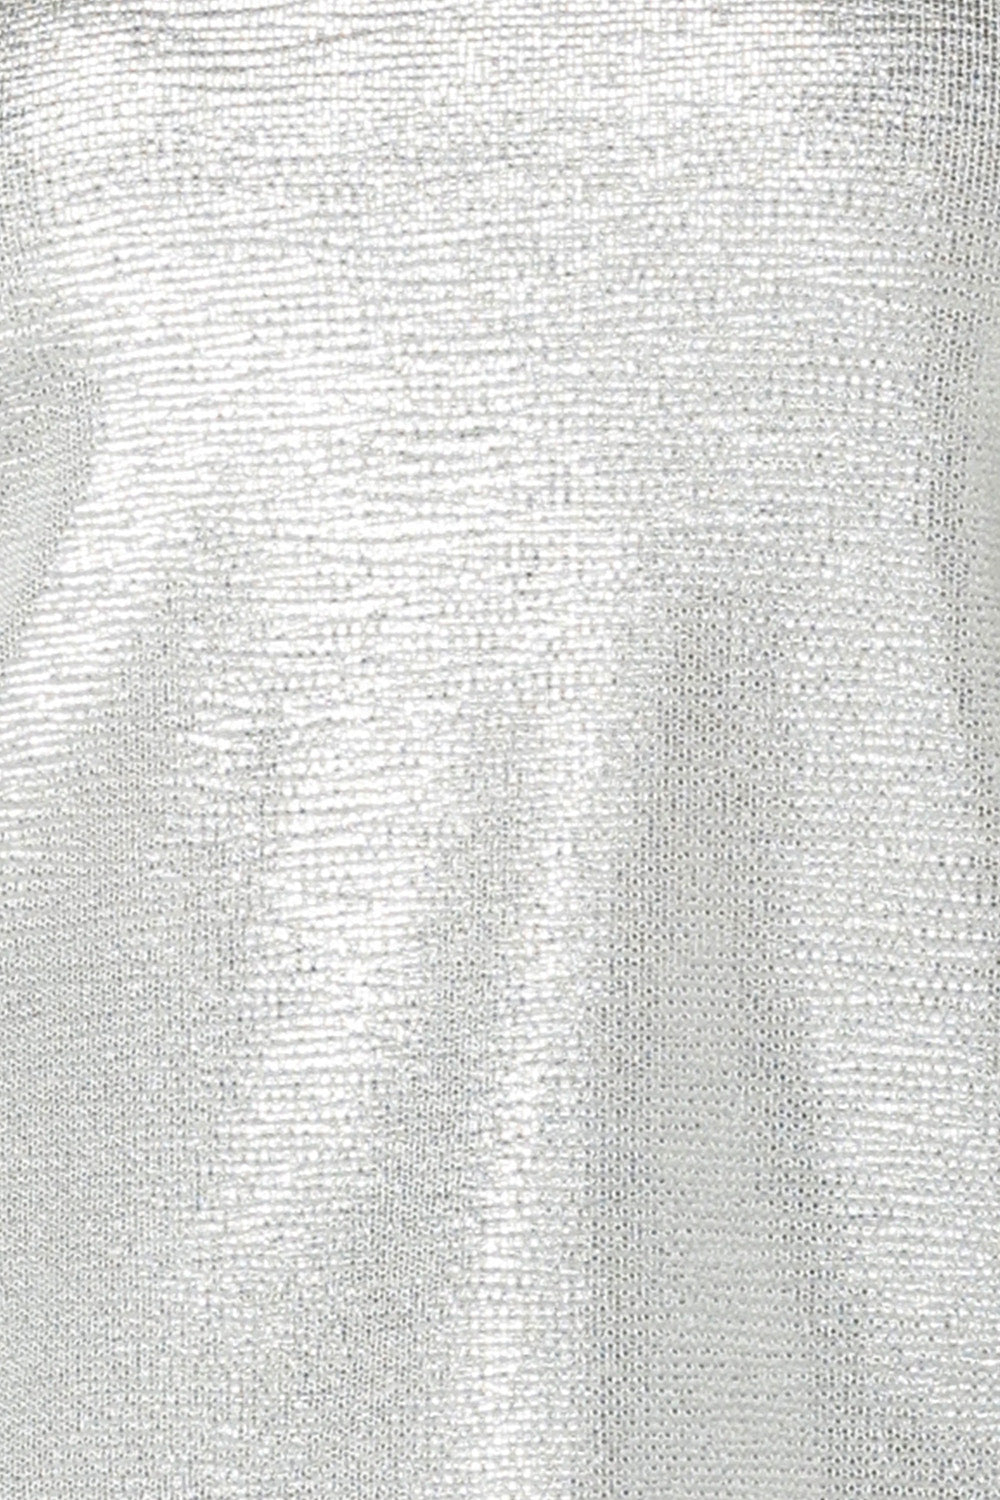 fabric swatch of sterling silver Xanadu, a shimmering jersey fabric in shades of sterling silver, this sparkly fabric is used by Australian and New Zealand women's fashion brand, L&F to make tops and accessories in their new occasionwear collection.